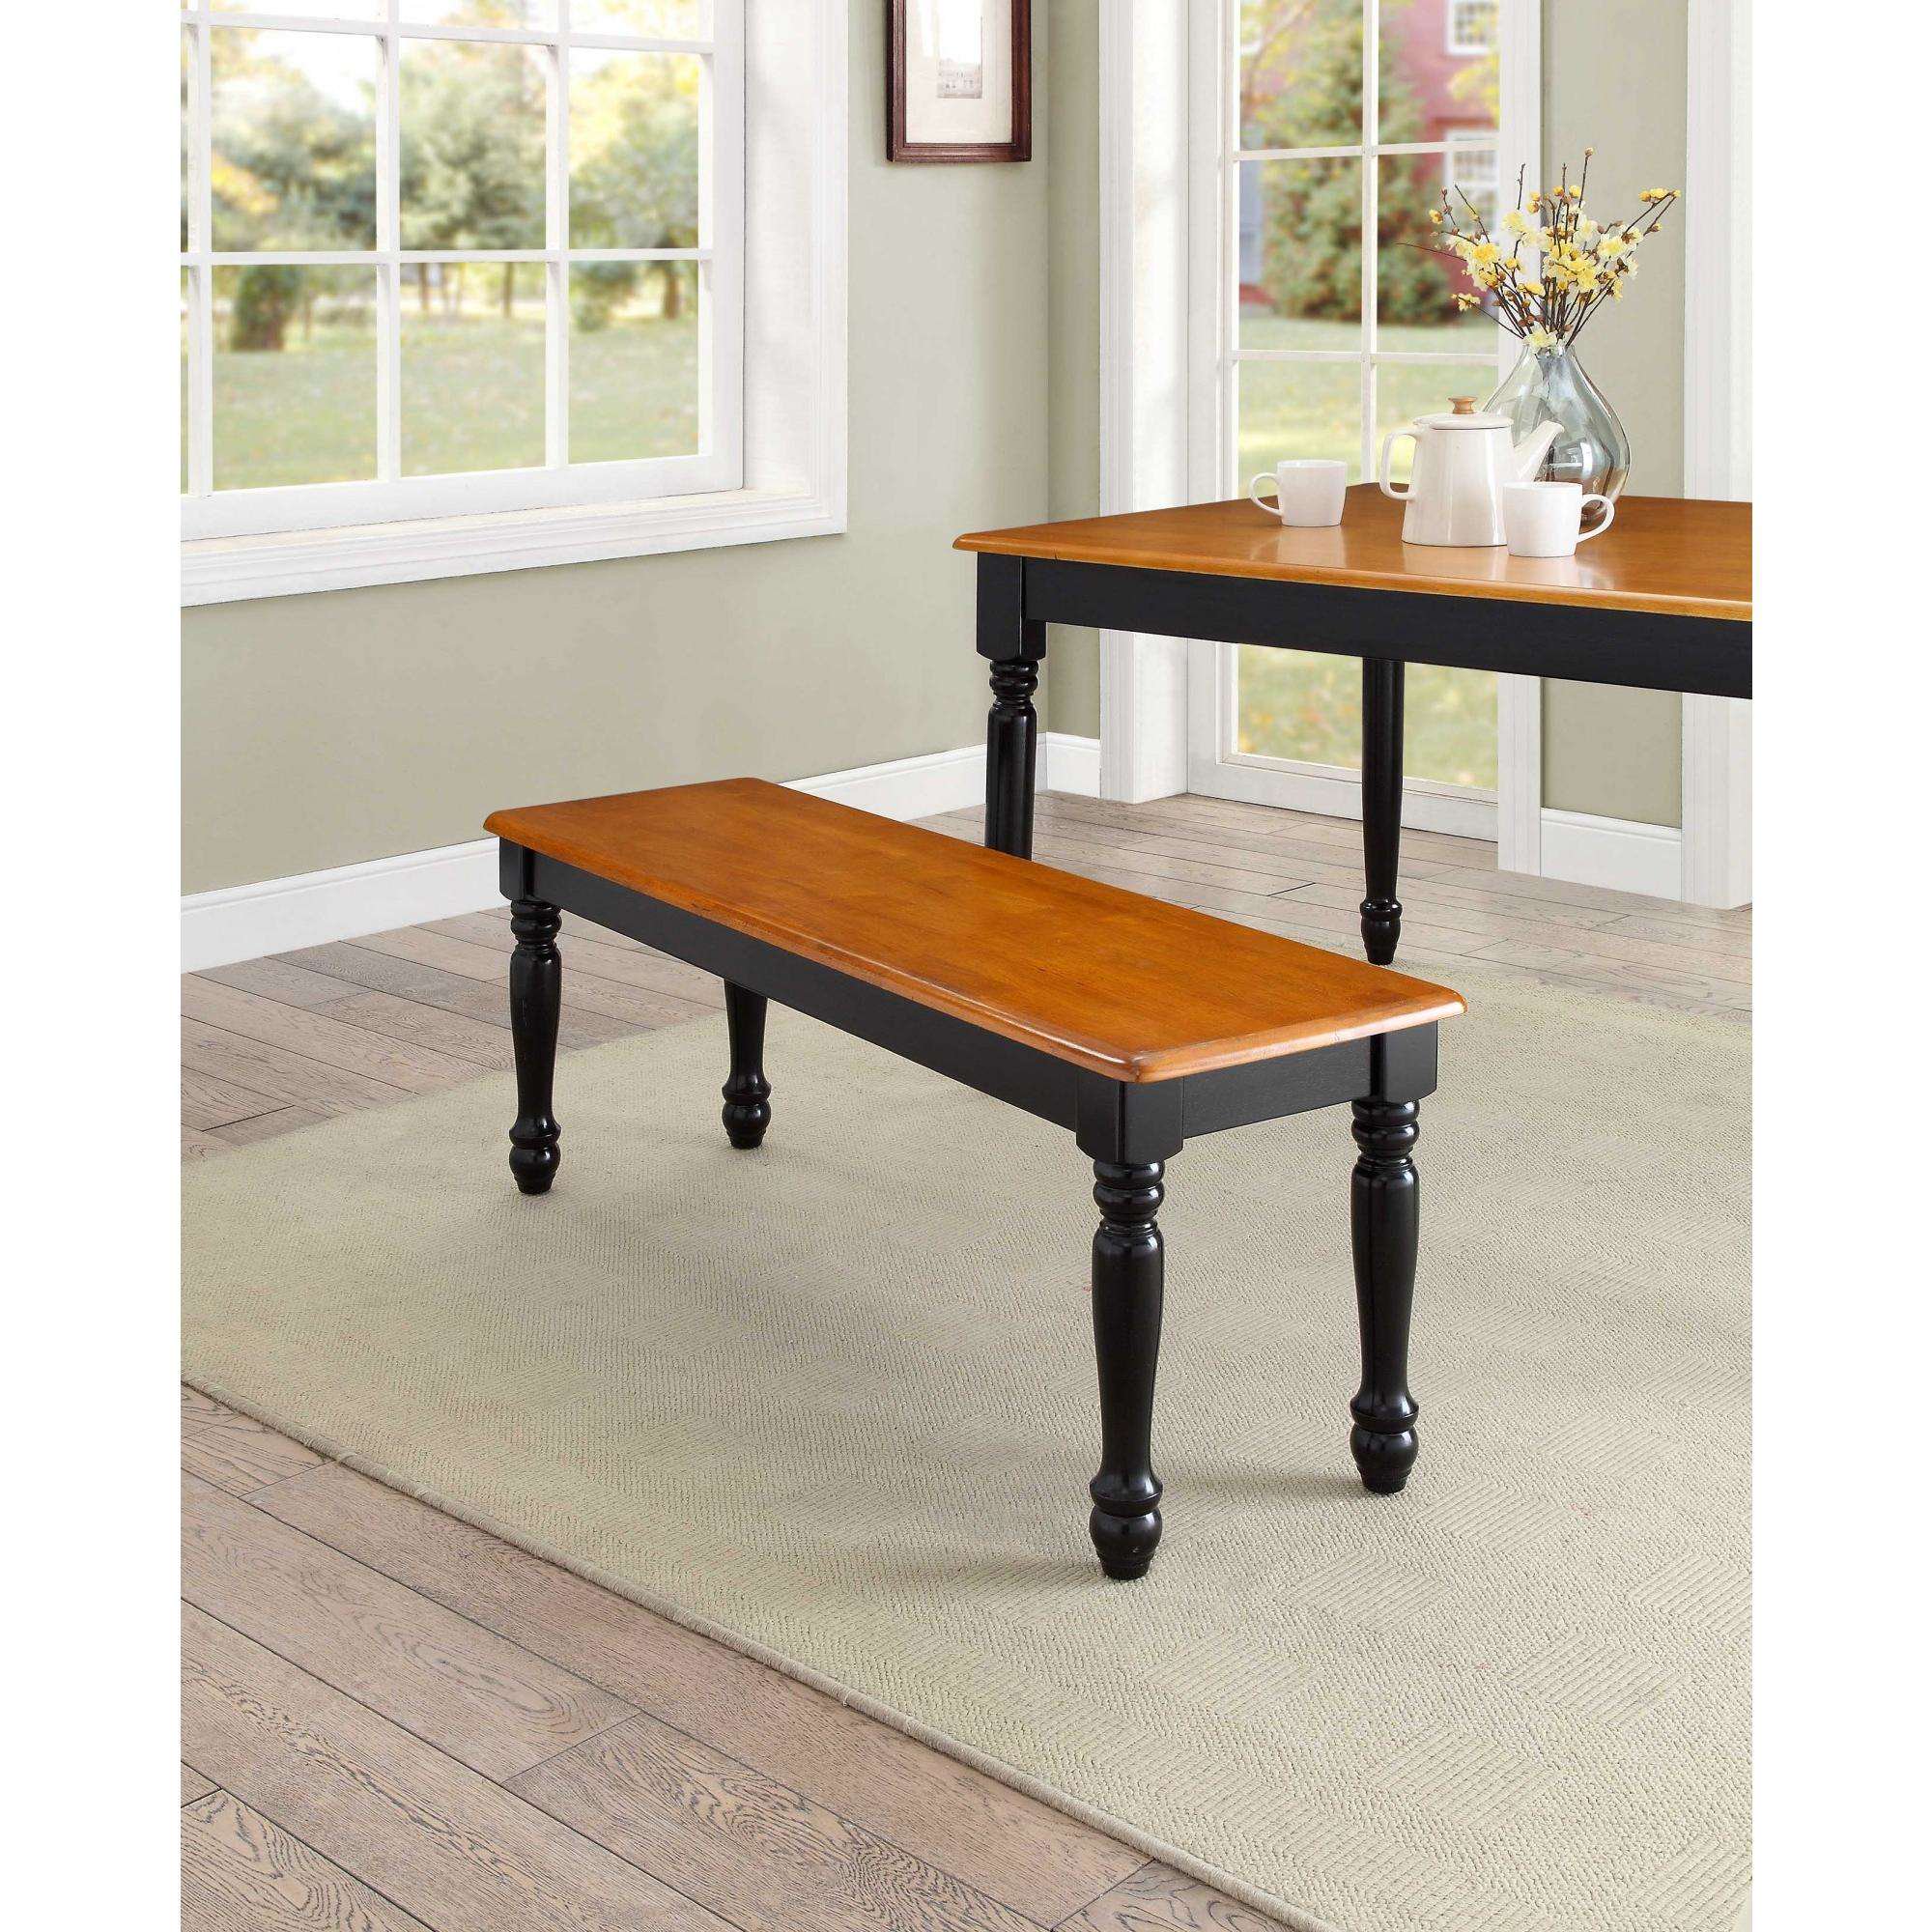 Better Homes & Gardens Autumn Lane Farmhouse Solid Wood Dining Bench, Black and Natural Finish - image 2 of 5